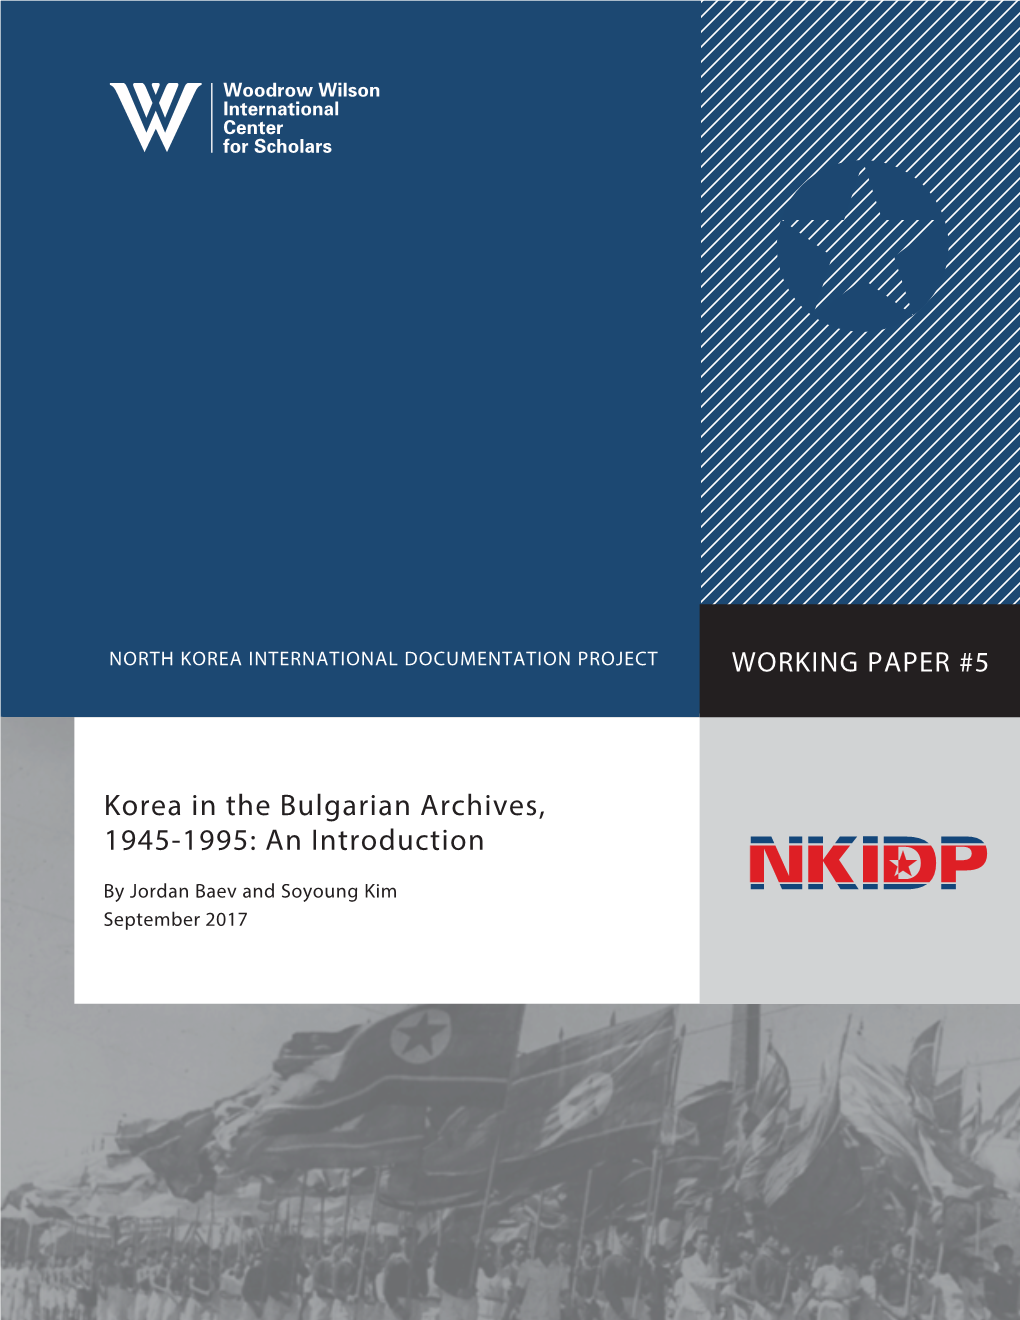 Korea in the Bulgarian Archives, 1945-1995: an Introduction